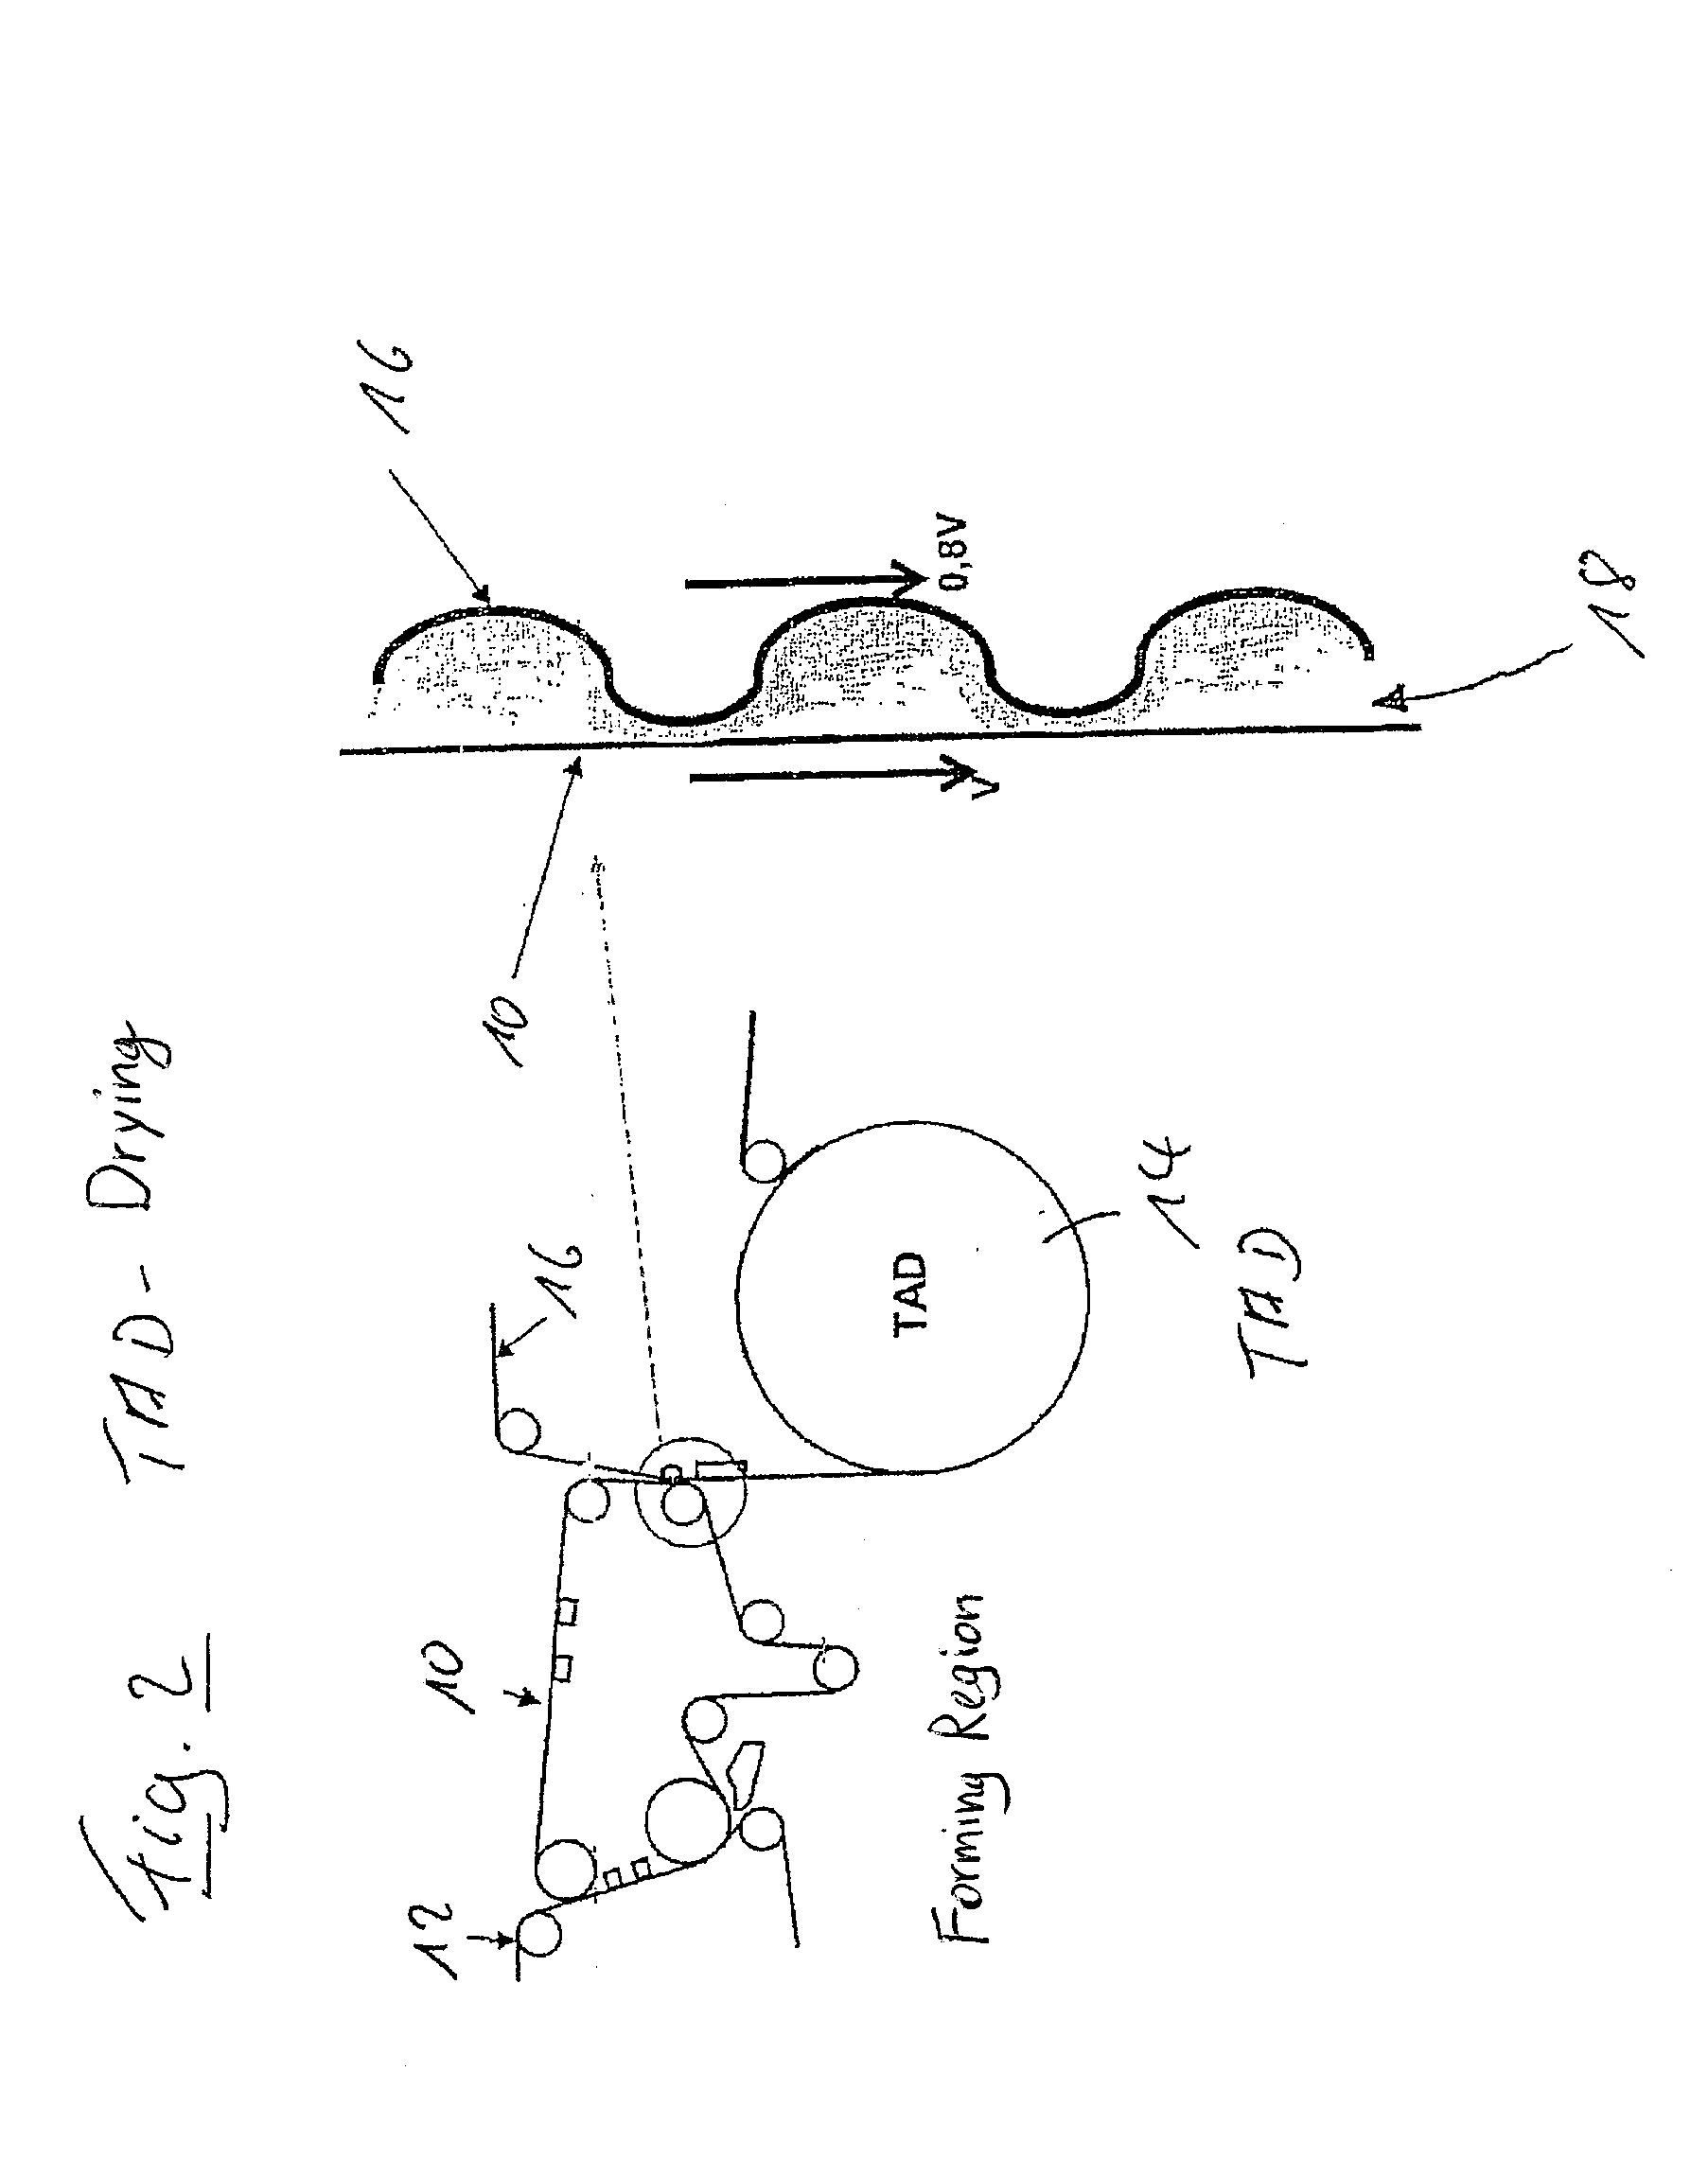 Machine for producing a fibrous web